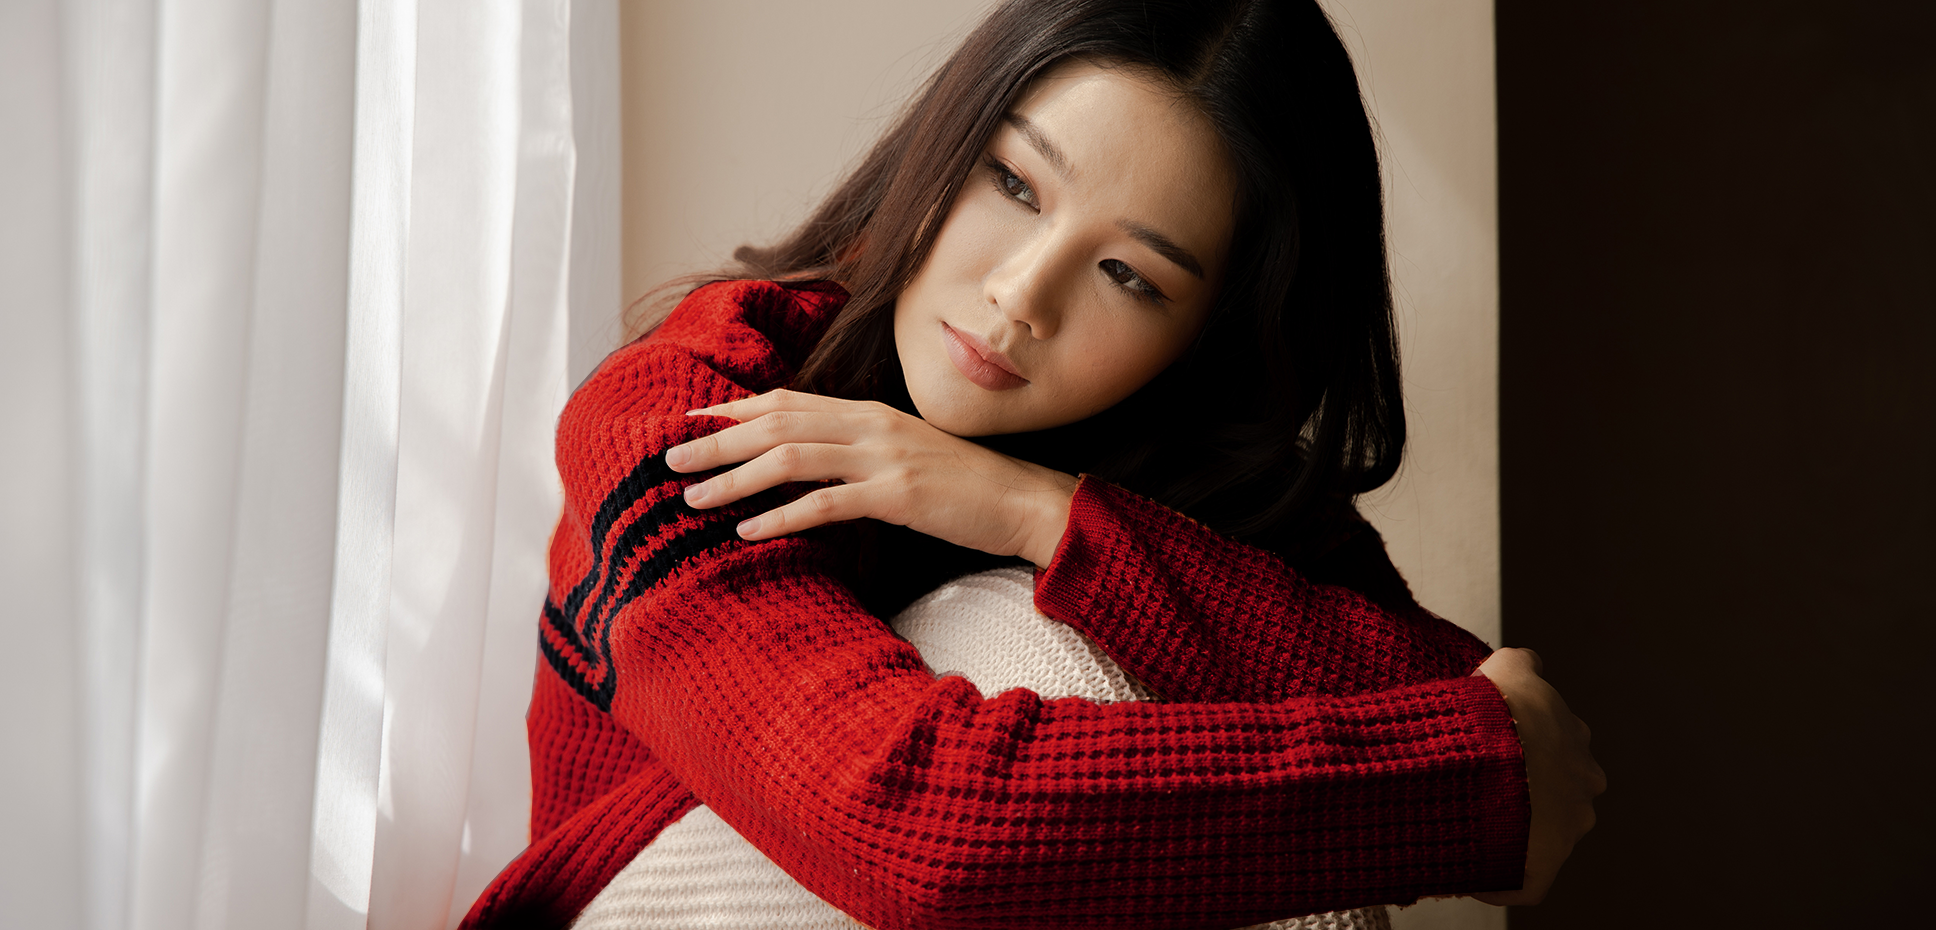 Asian woman in a red sweater looking out the window